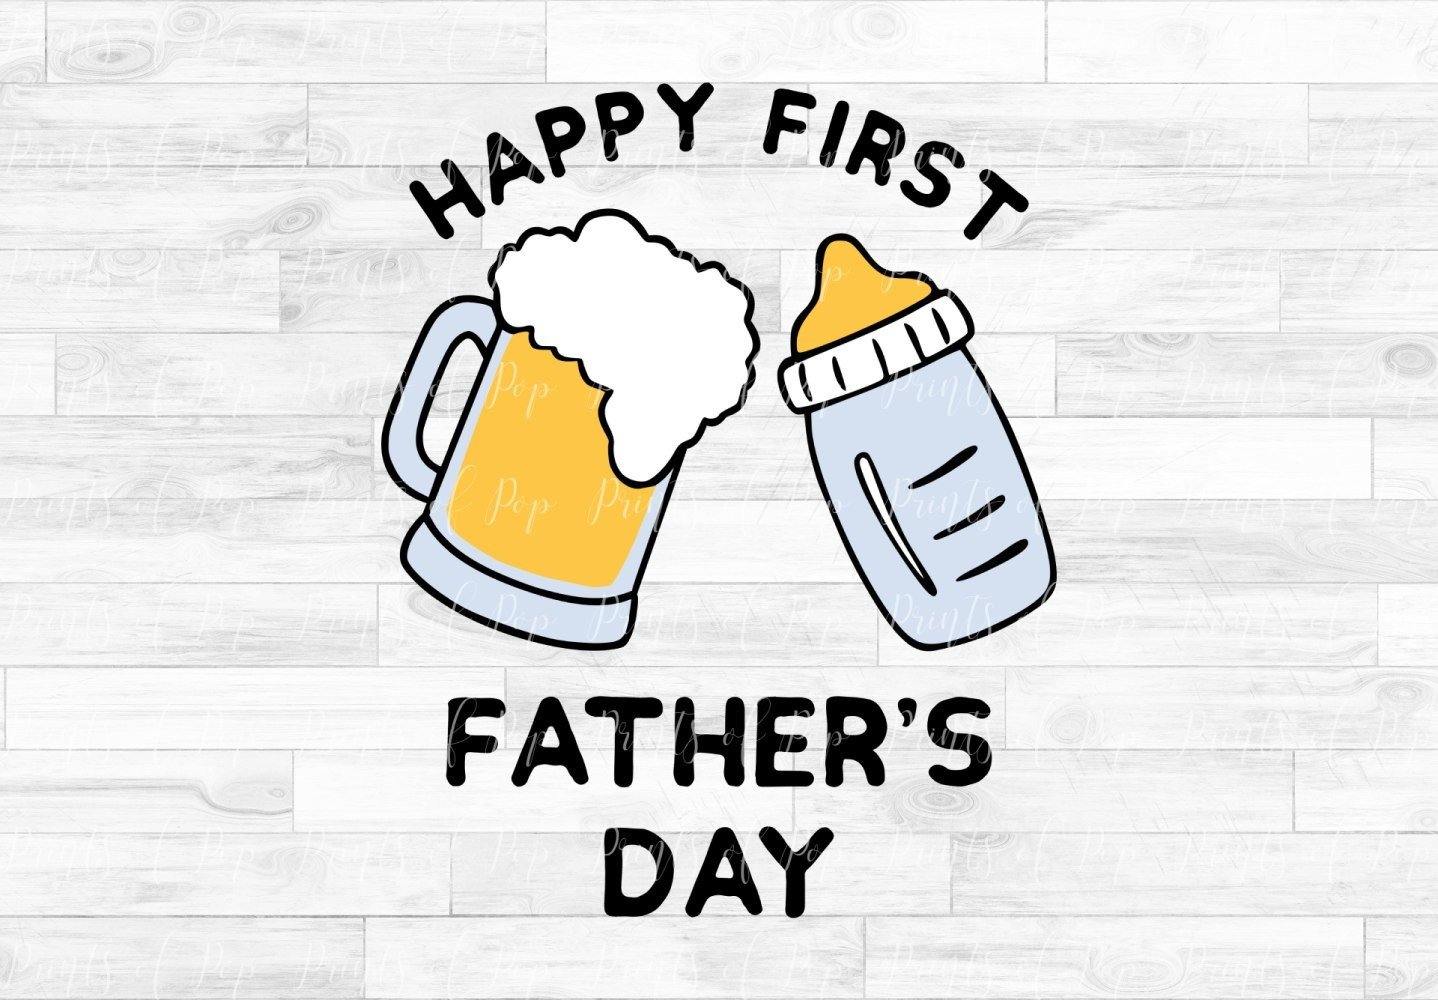 Download Happy First Father S Day Svg Dxf Png Clip Art By Printsofpop